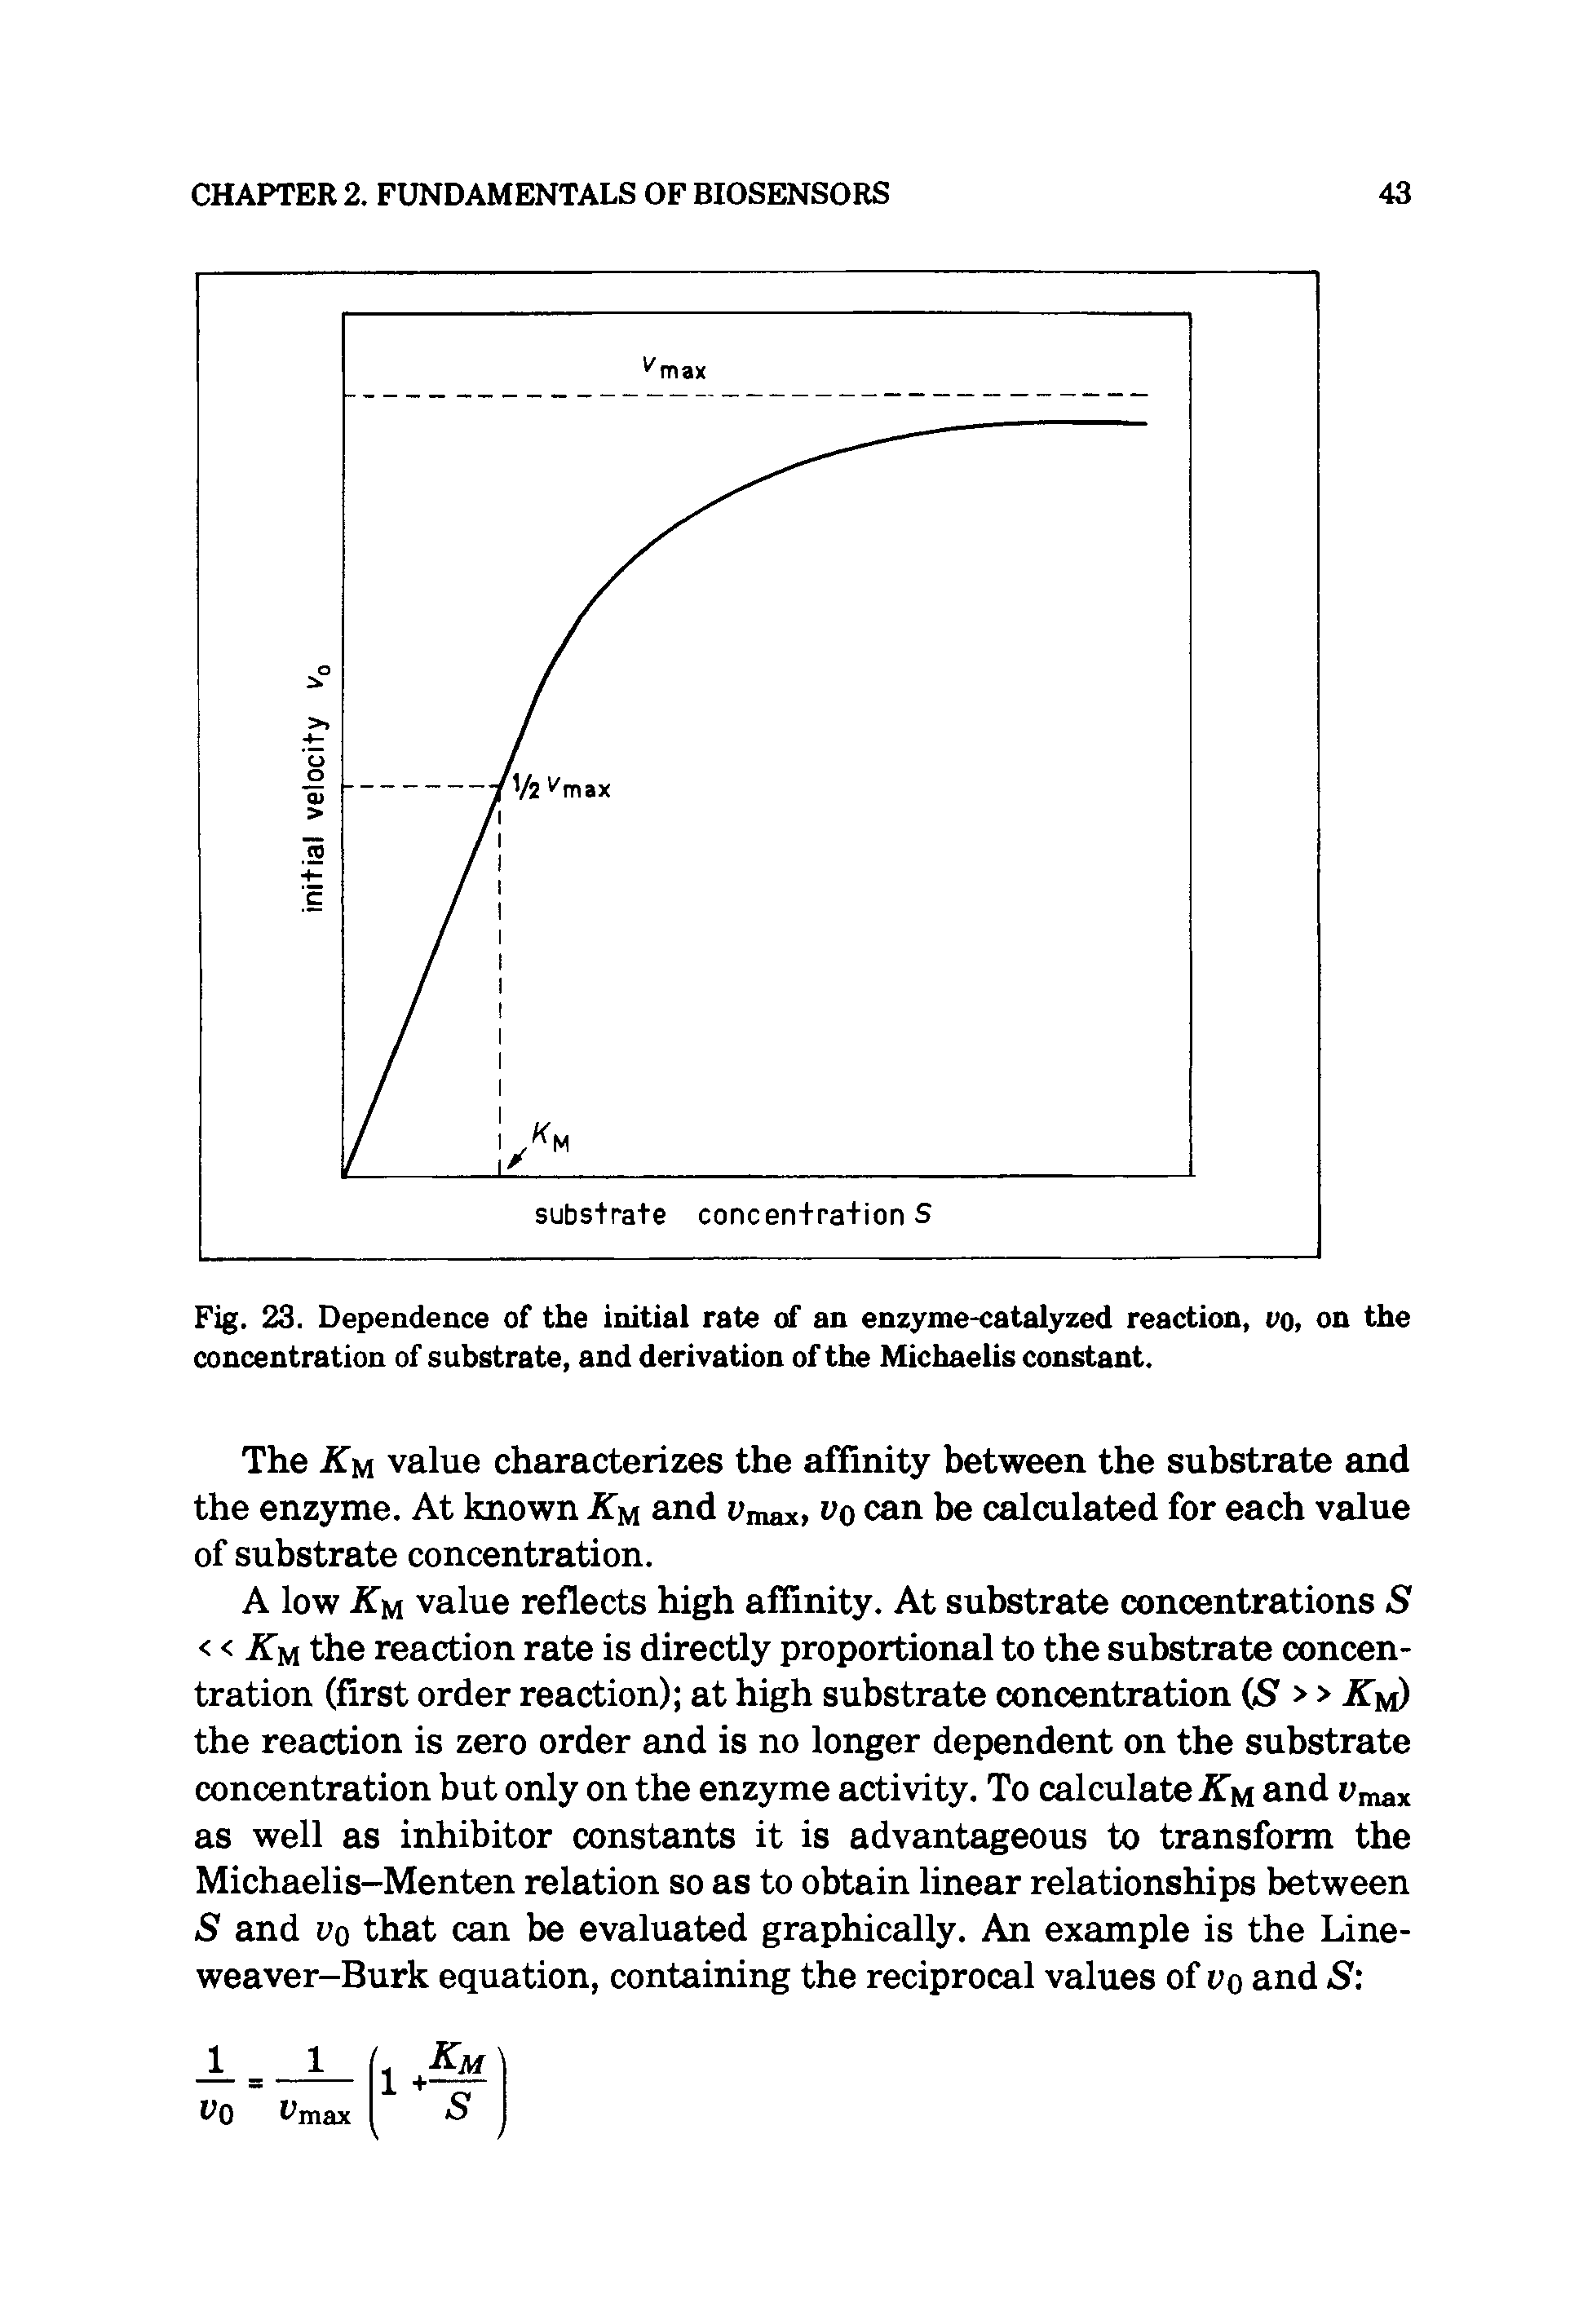 Fig. 23. Dependence of the initial rate of an enzyme-catalyzed reaction, vq, on the concentration of substrate, and derivation of the Michaelis constant.